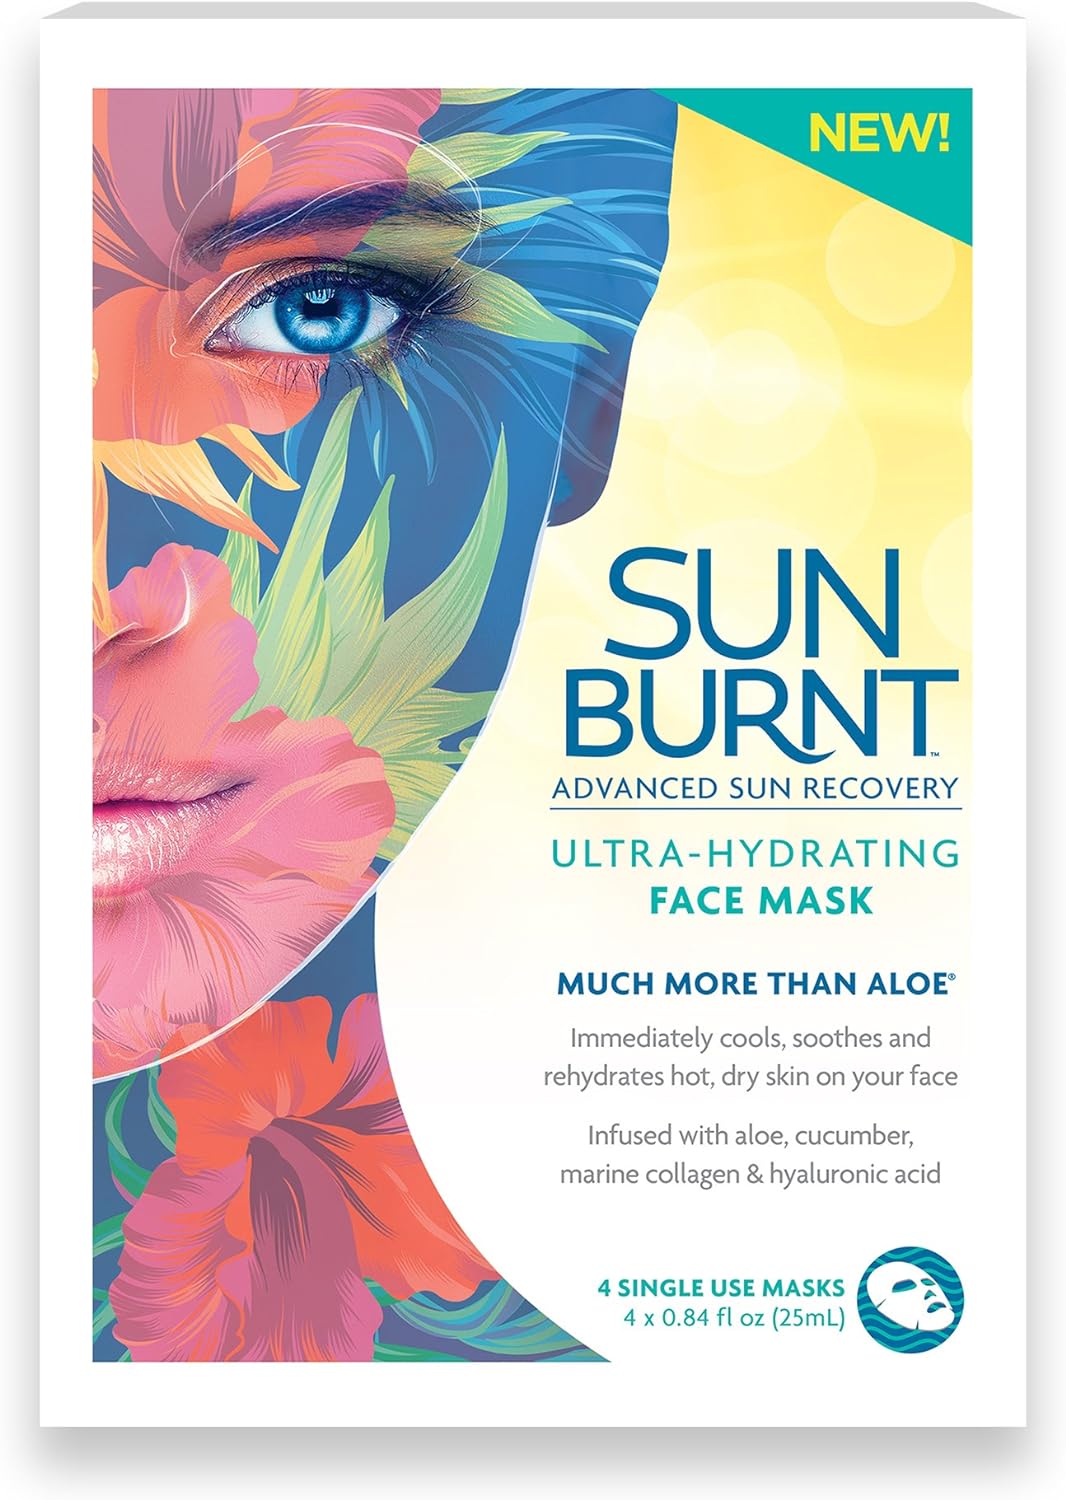 Sunburnt Ultra-Hydrating Face Sheet Mask, Advanced Sun Recovery, Treat Dry Sun Damaged Skin, For After Sun Exposure, Much More than Aloe, Soothes and Rehydrates Hot Dry Skin (4 single use masks) : Beauty & Personal Care